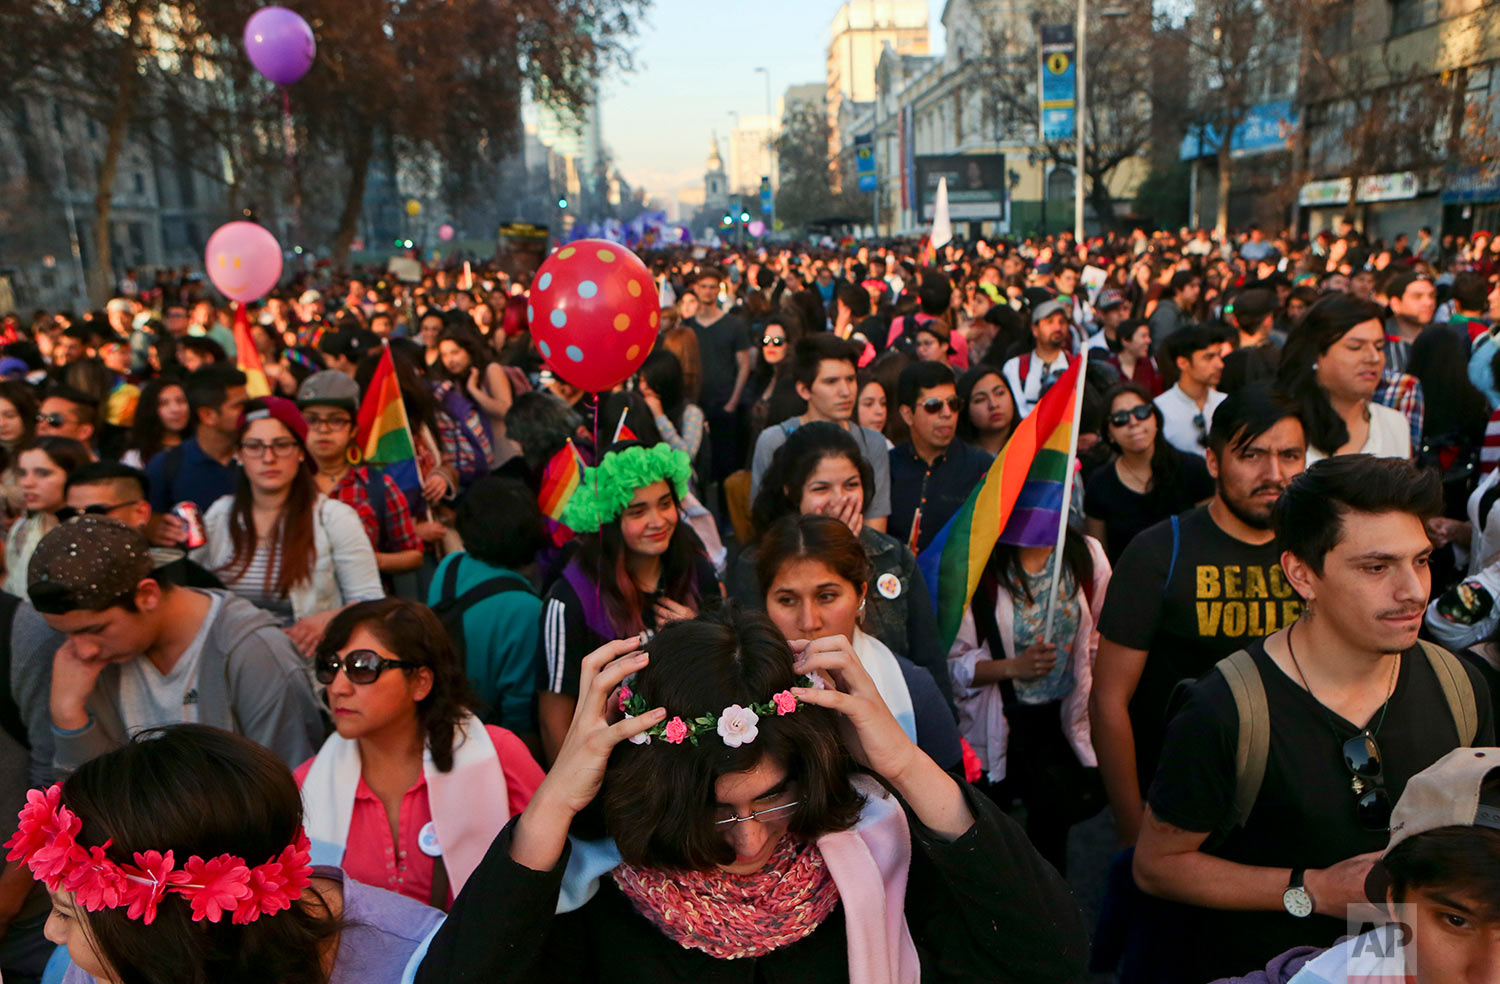  In this July 1, 2017 photo, Angela, below center, places a crown of flowers on her head as she attends a Gay Pride march alongside other transgender children in Santiago, Chile. The transgender children at the parade had socially transitioned to the